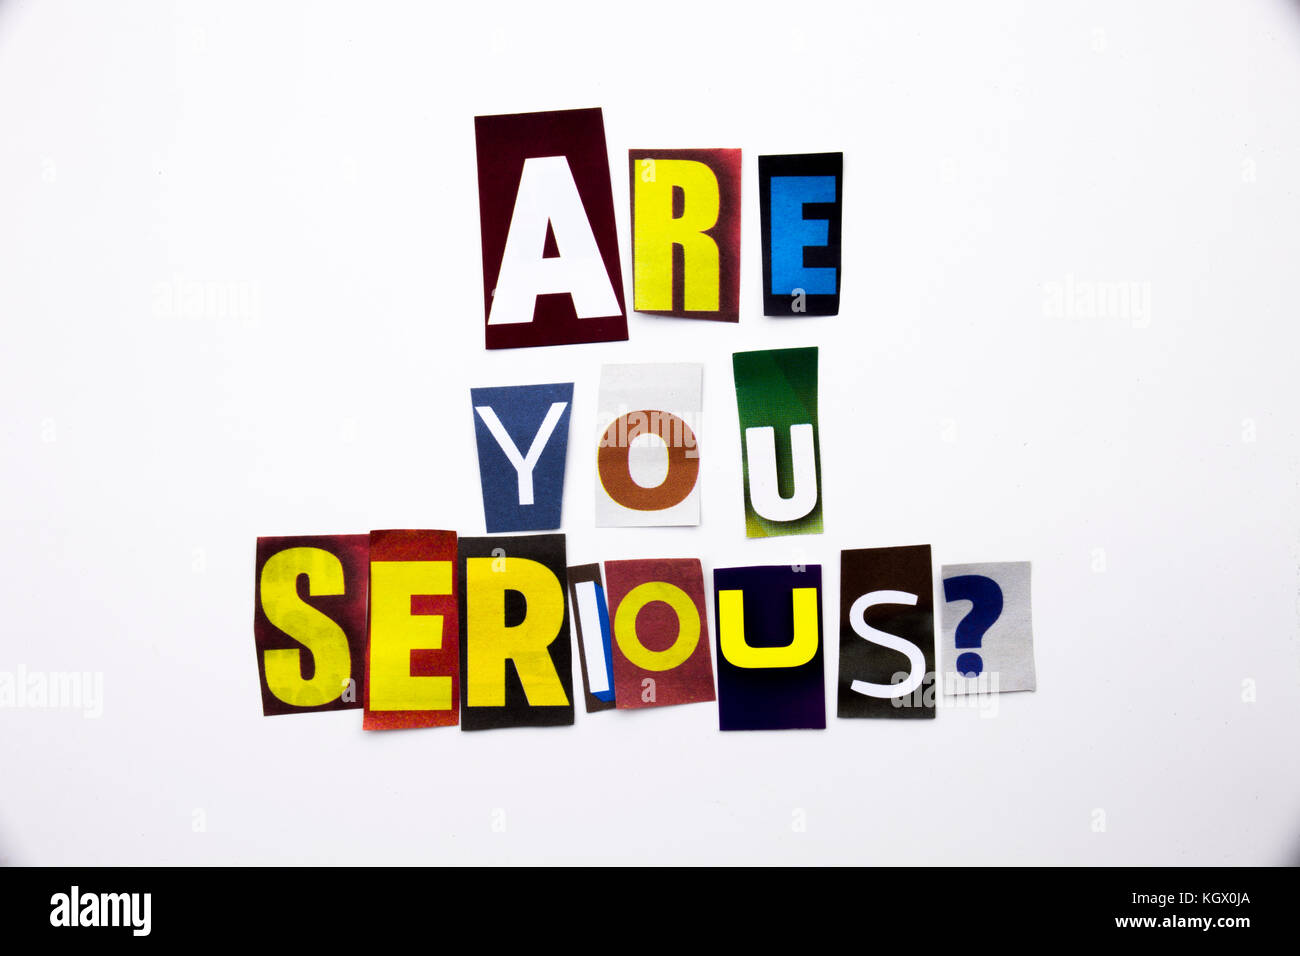 A word writing text showing concept of Are You Serious question made of different magazine newspaper letter for Business case on the white background  Stock Photo